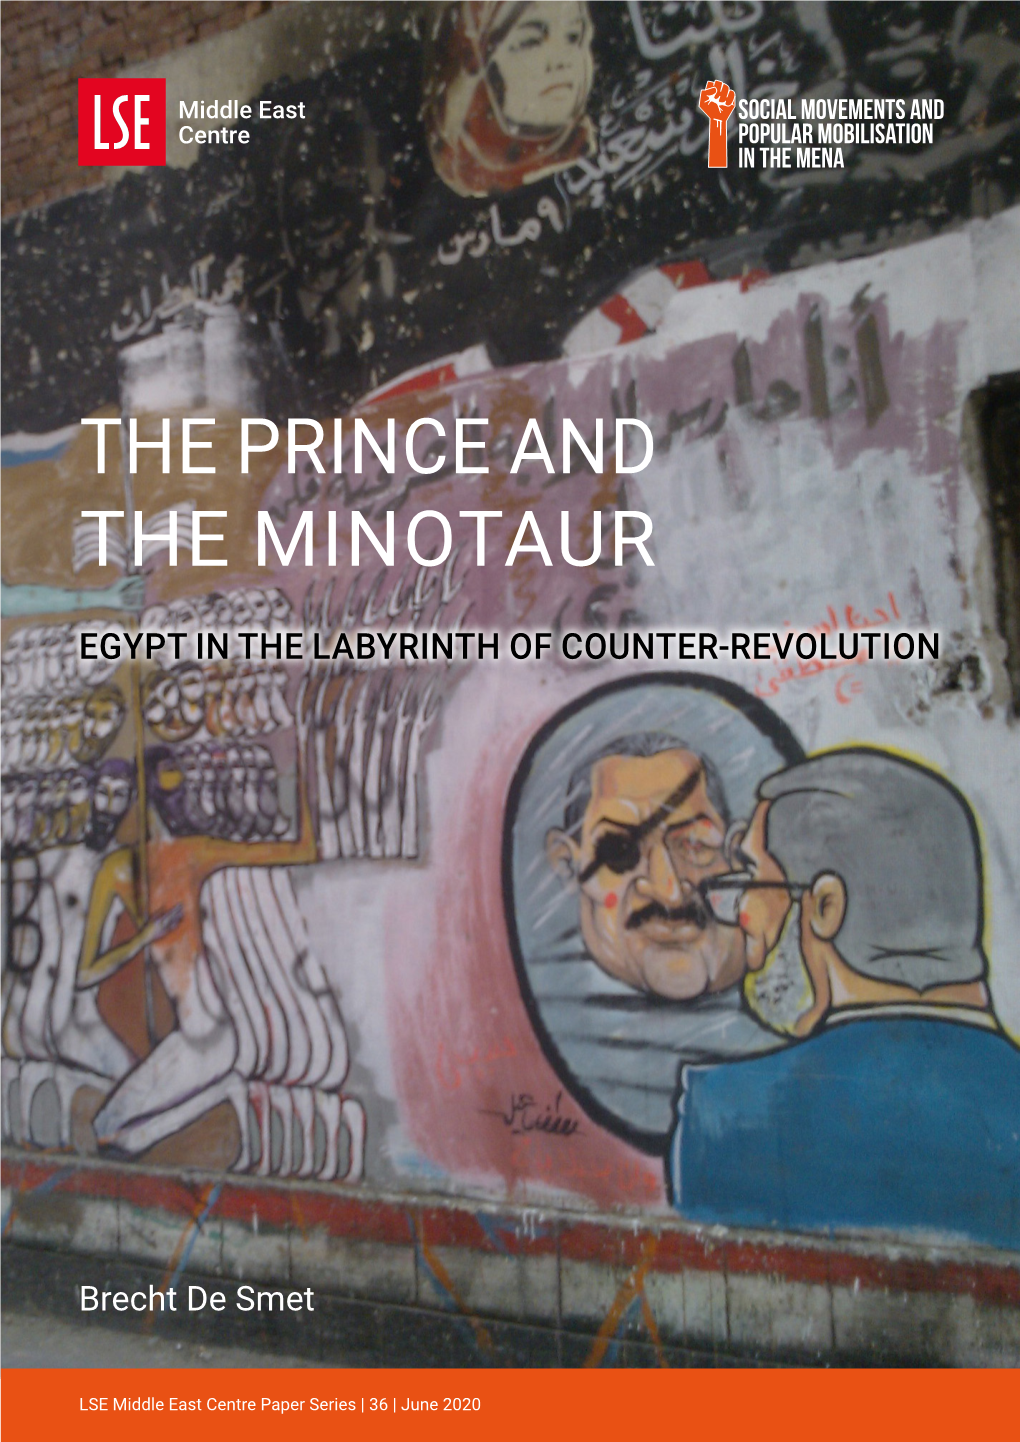 The Prince and the Minotaur